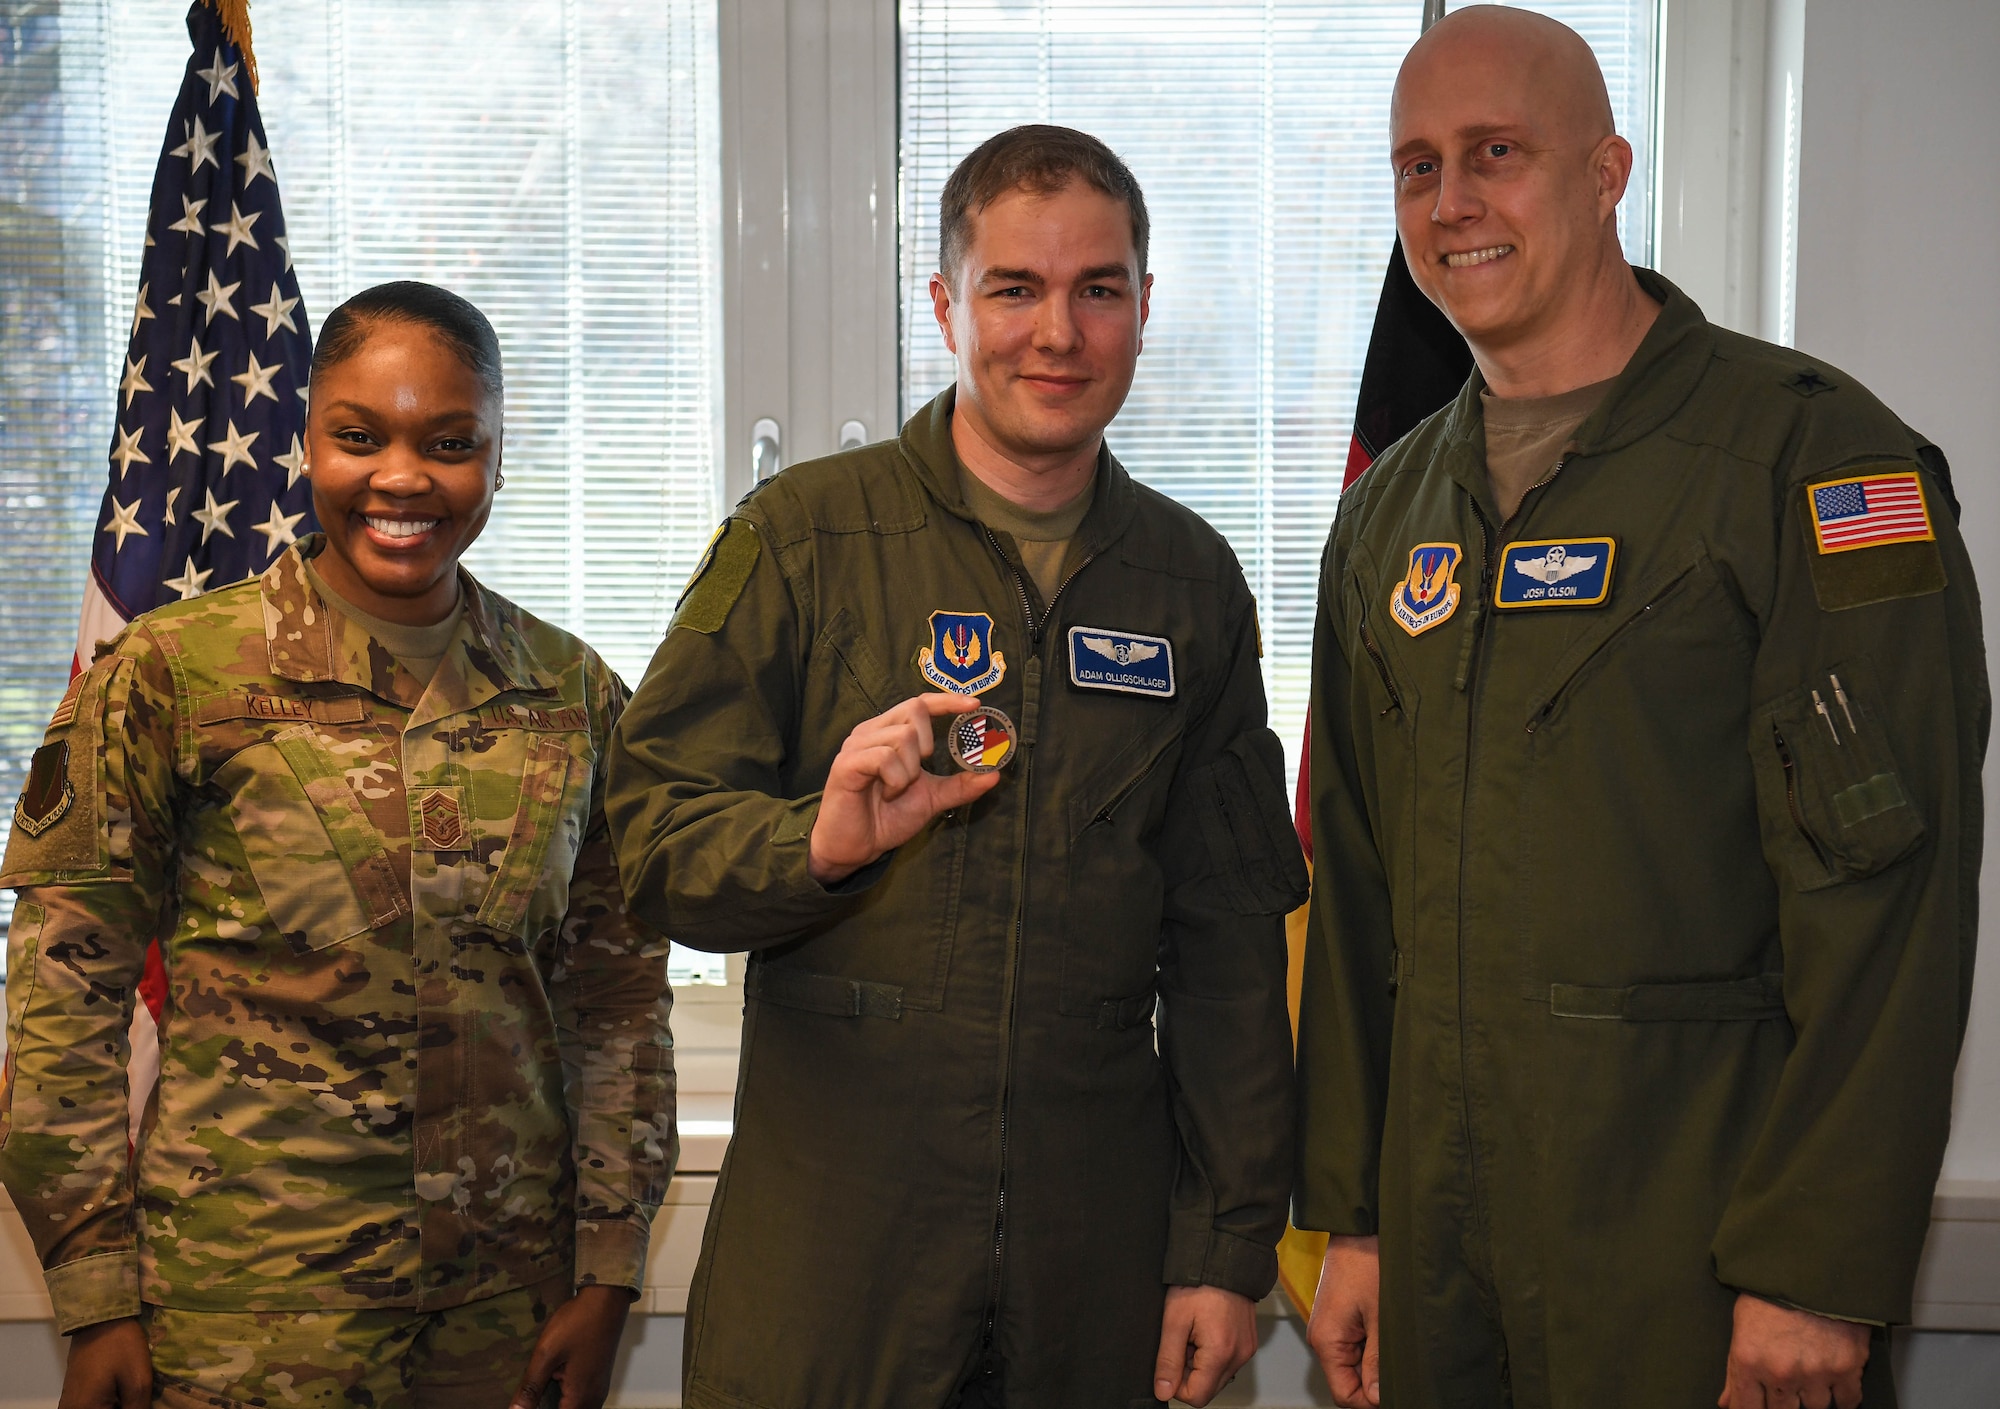 U.S. Air Force Capt. Adam Olligschlager, 86th Airlift Wing plans and programs action officer, center, poses for a photo with the 86th Airlift Wing commander and command chief at Ramstein Air Base, Germany, March 10, 2022. Olligschlager was celebrated as Airlifter of the Week for his outstanding organization and execution of the Secretary of Defense Dispersal Plan. (U.S. Air Force photo by Airman 1st Class Jared Lovett)